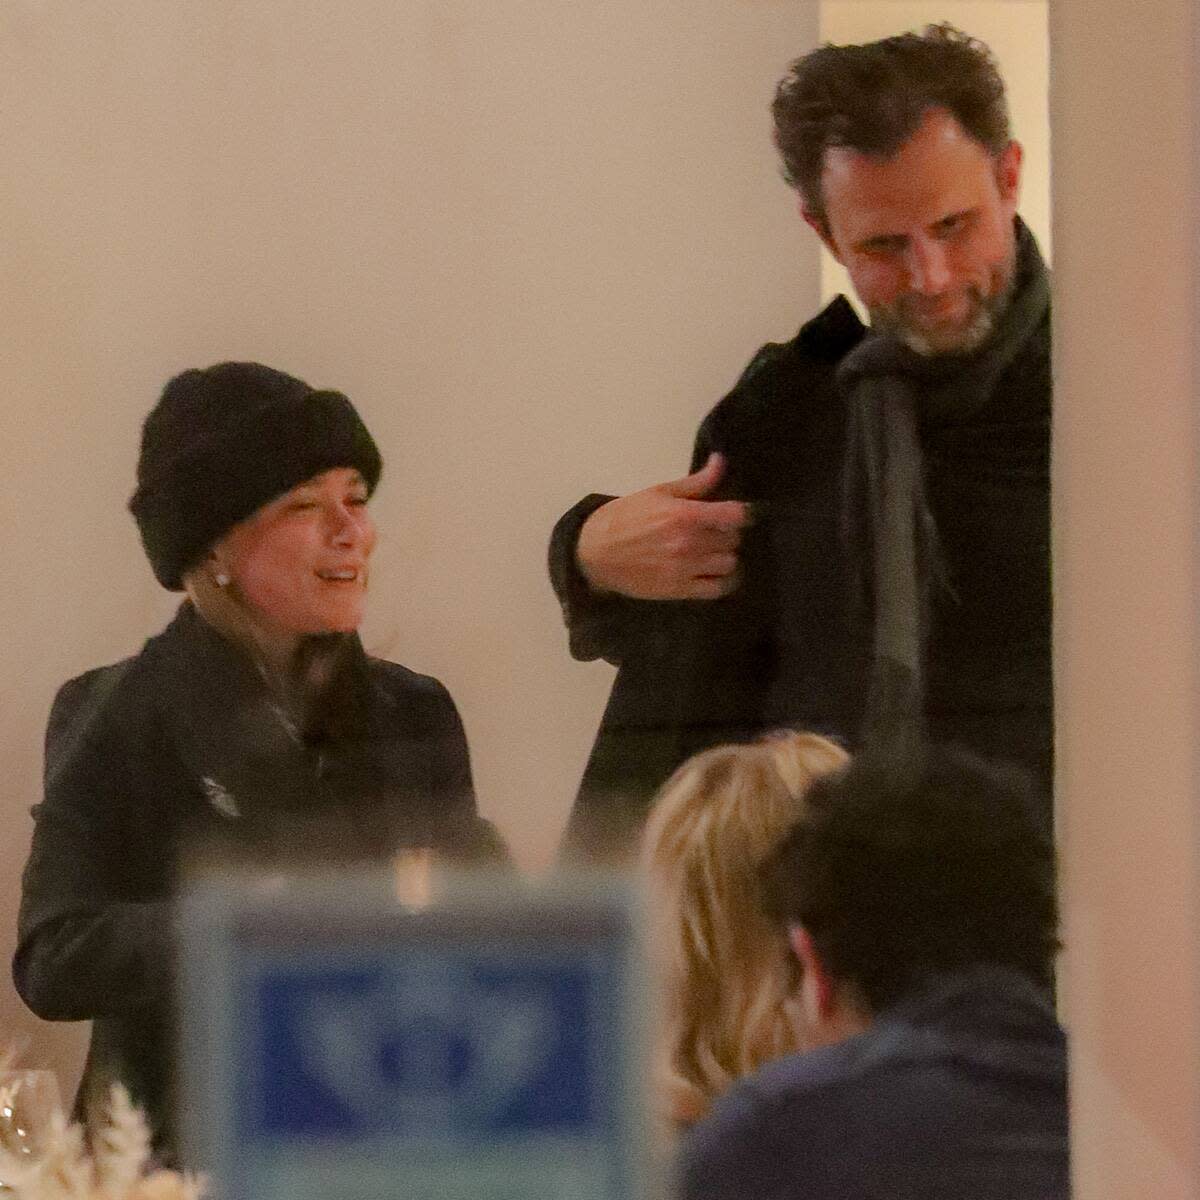 Mary-Kate Olsen seen with Brightwire CEO John Cooper after Olivier Sarkozy’s divorce